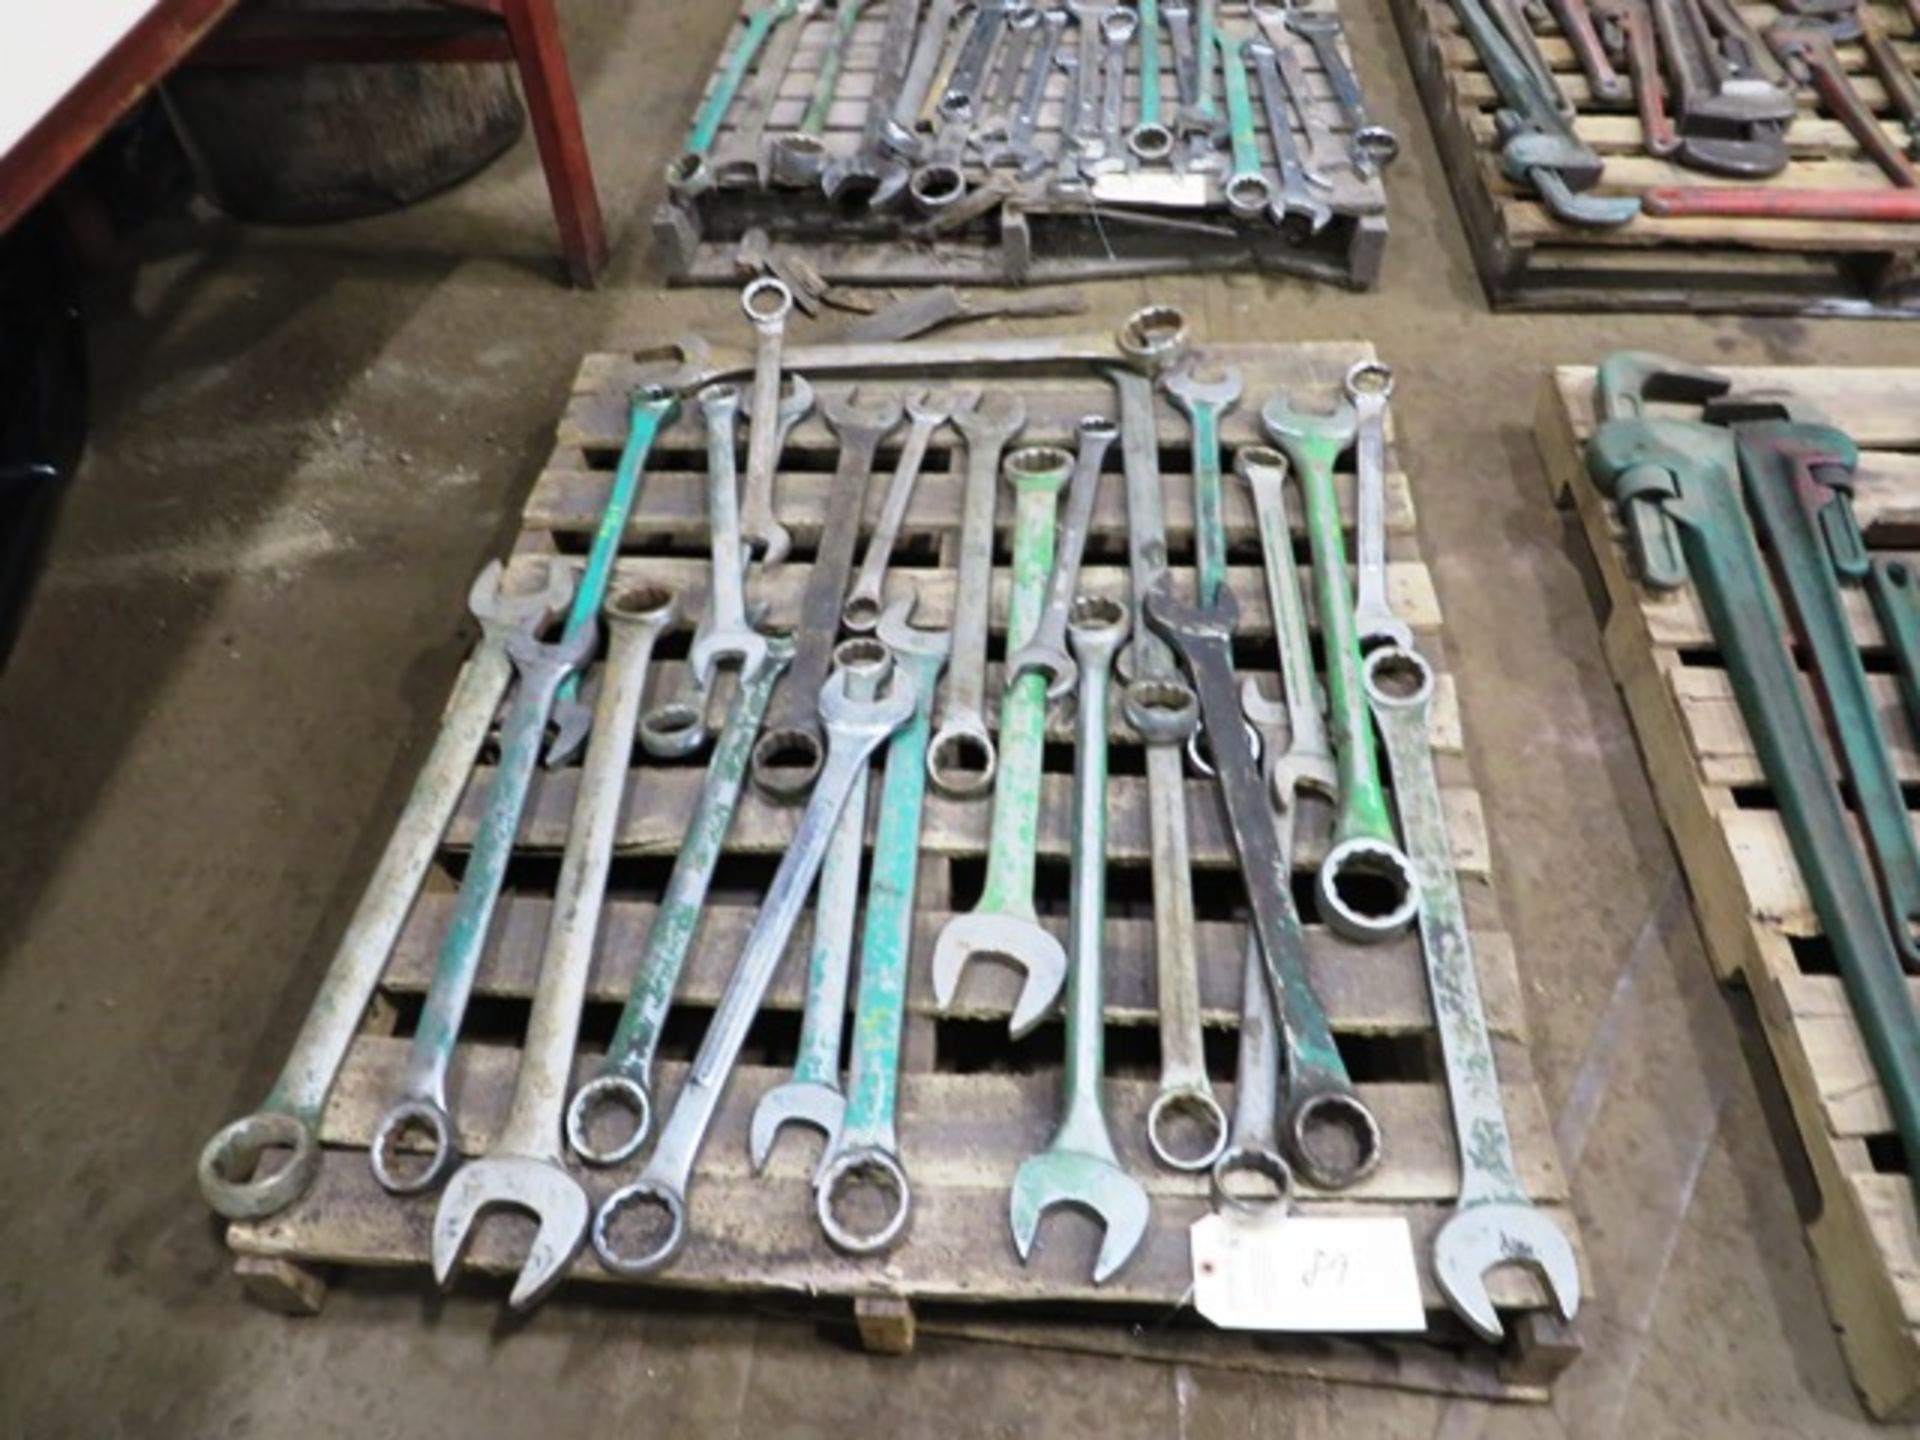 Wrenches on Pallet